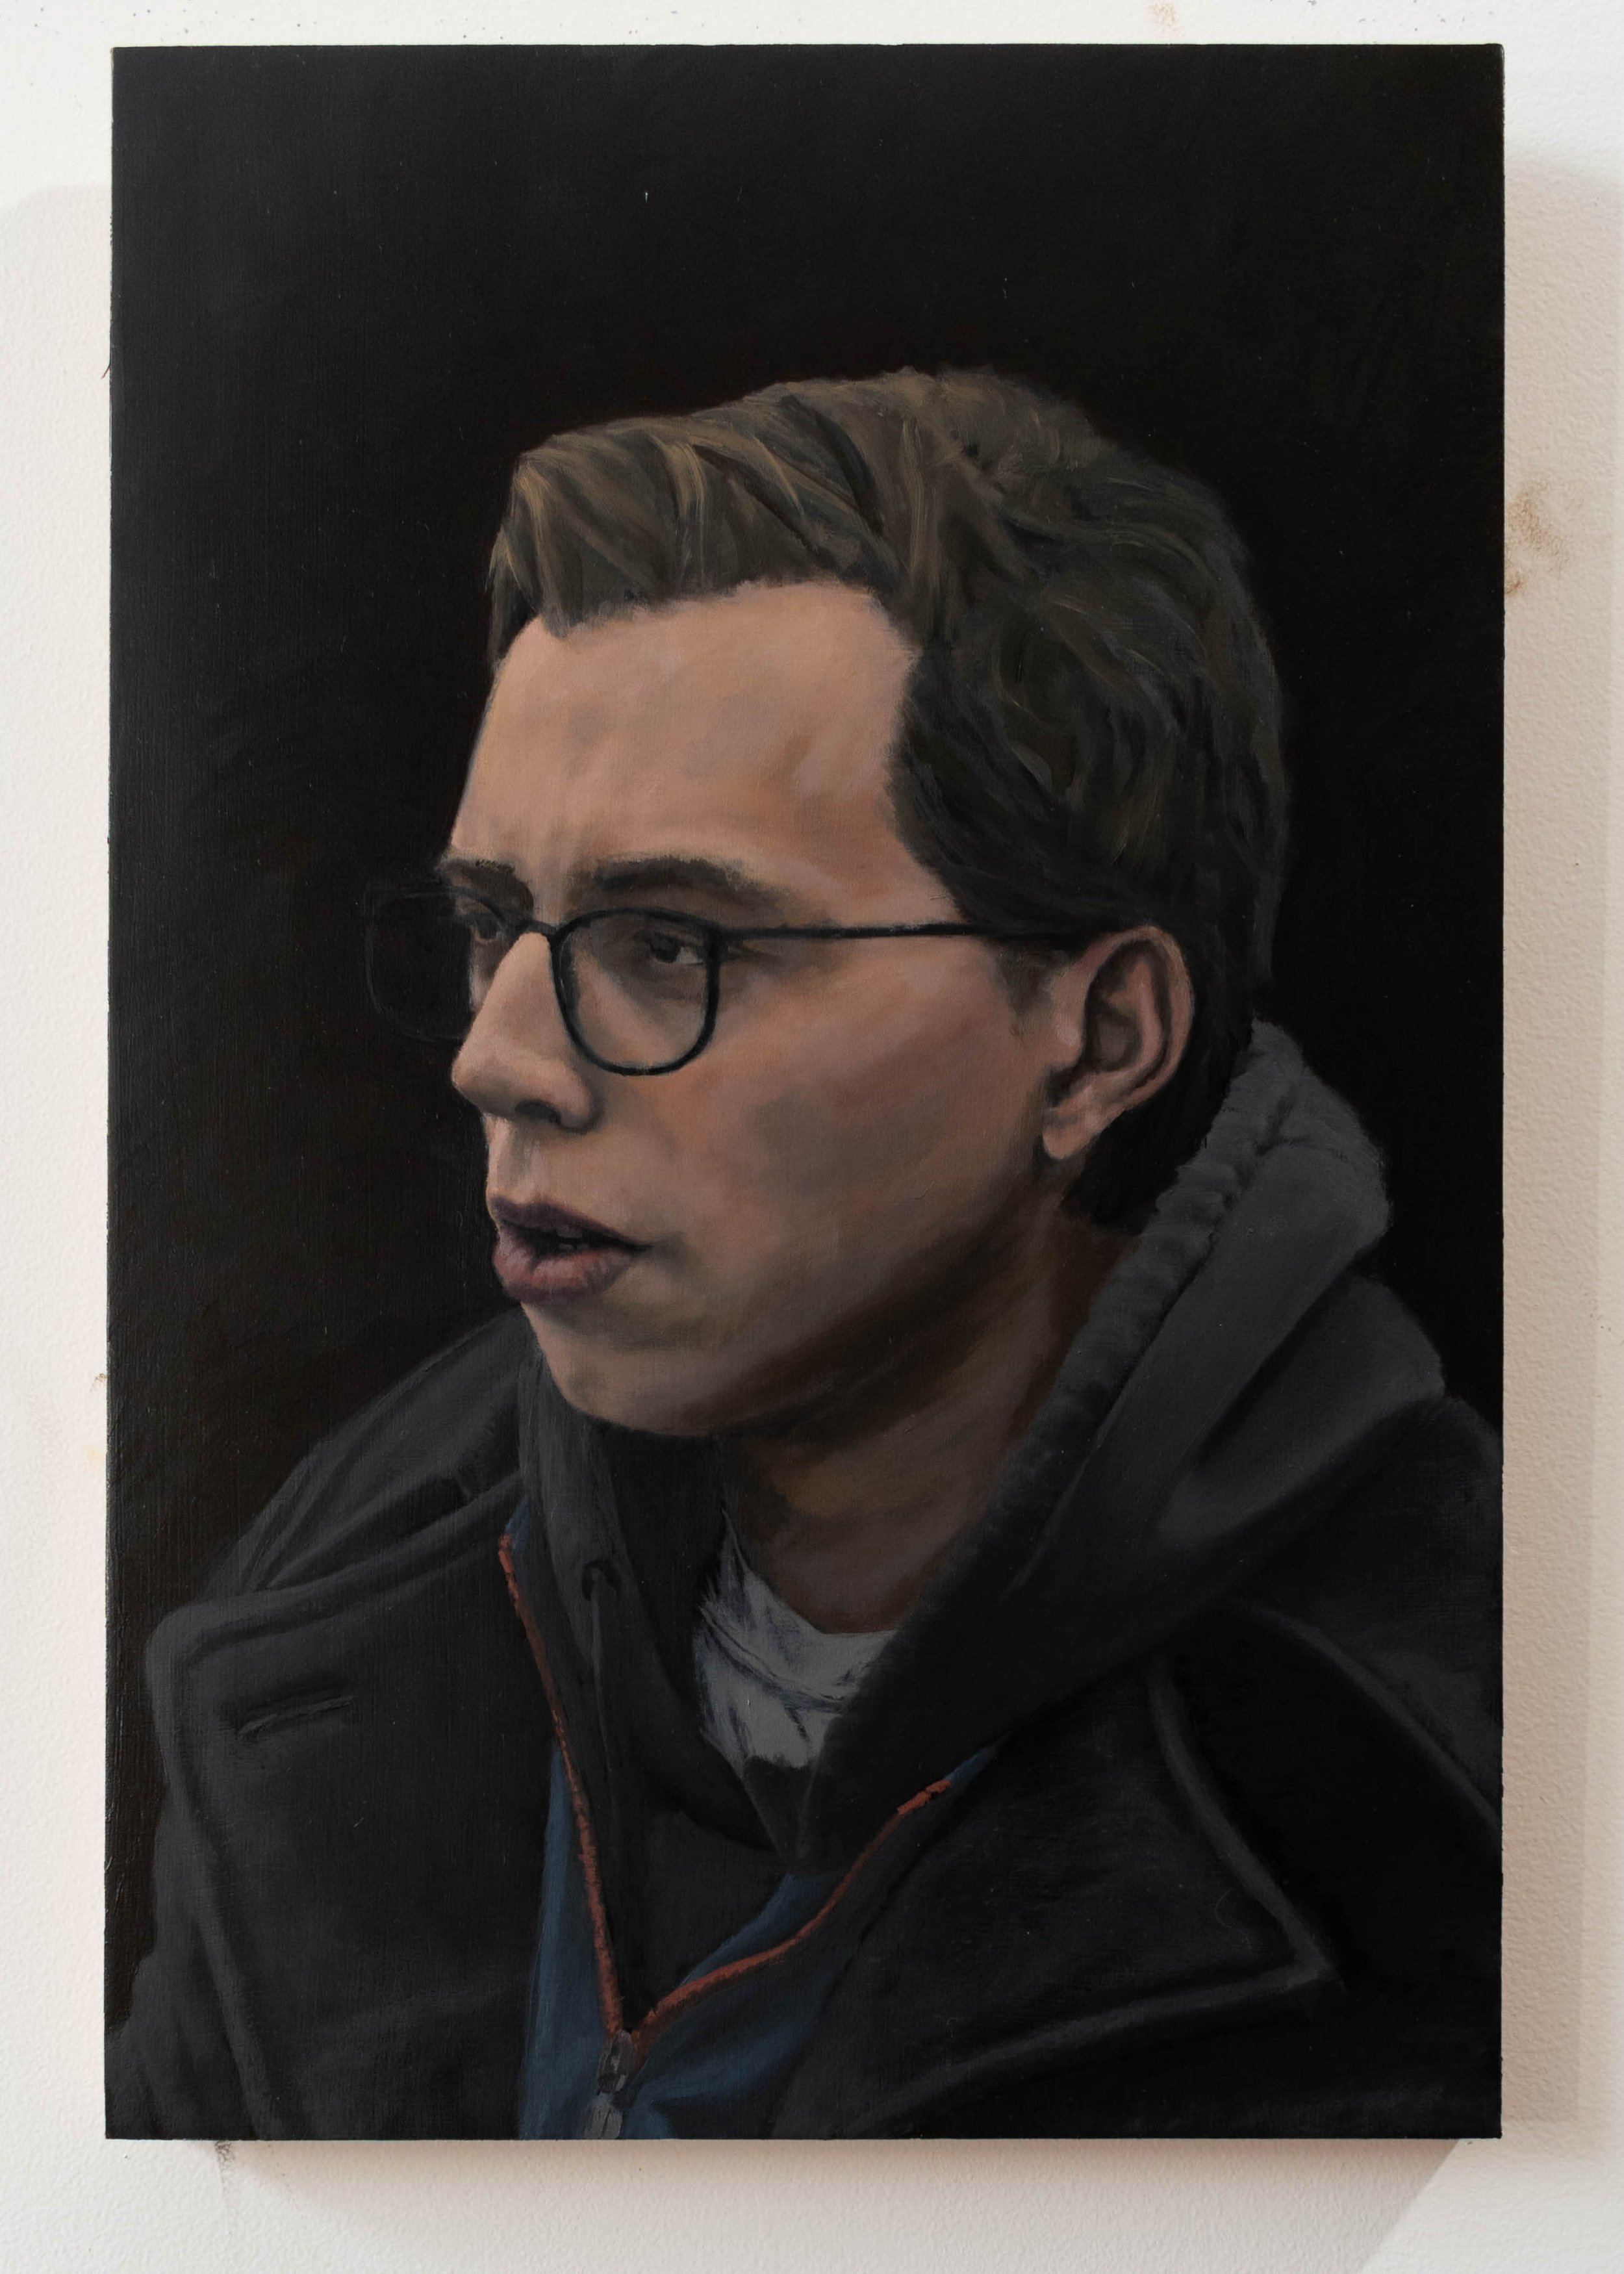  portrait of a young man with glasses - 12” x 18” - Oil on Cradled Panel - 2021 